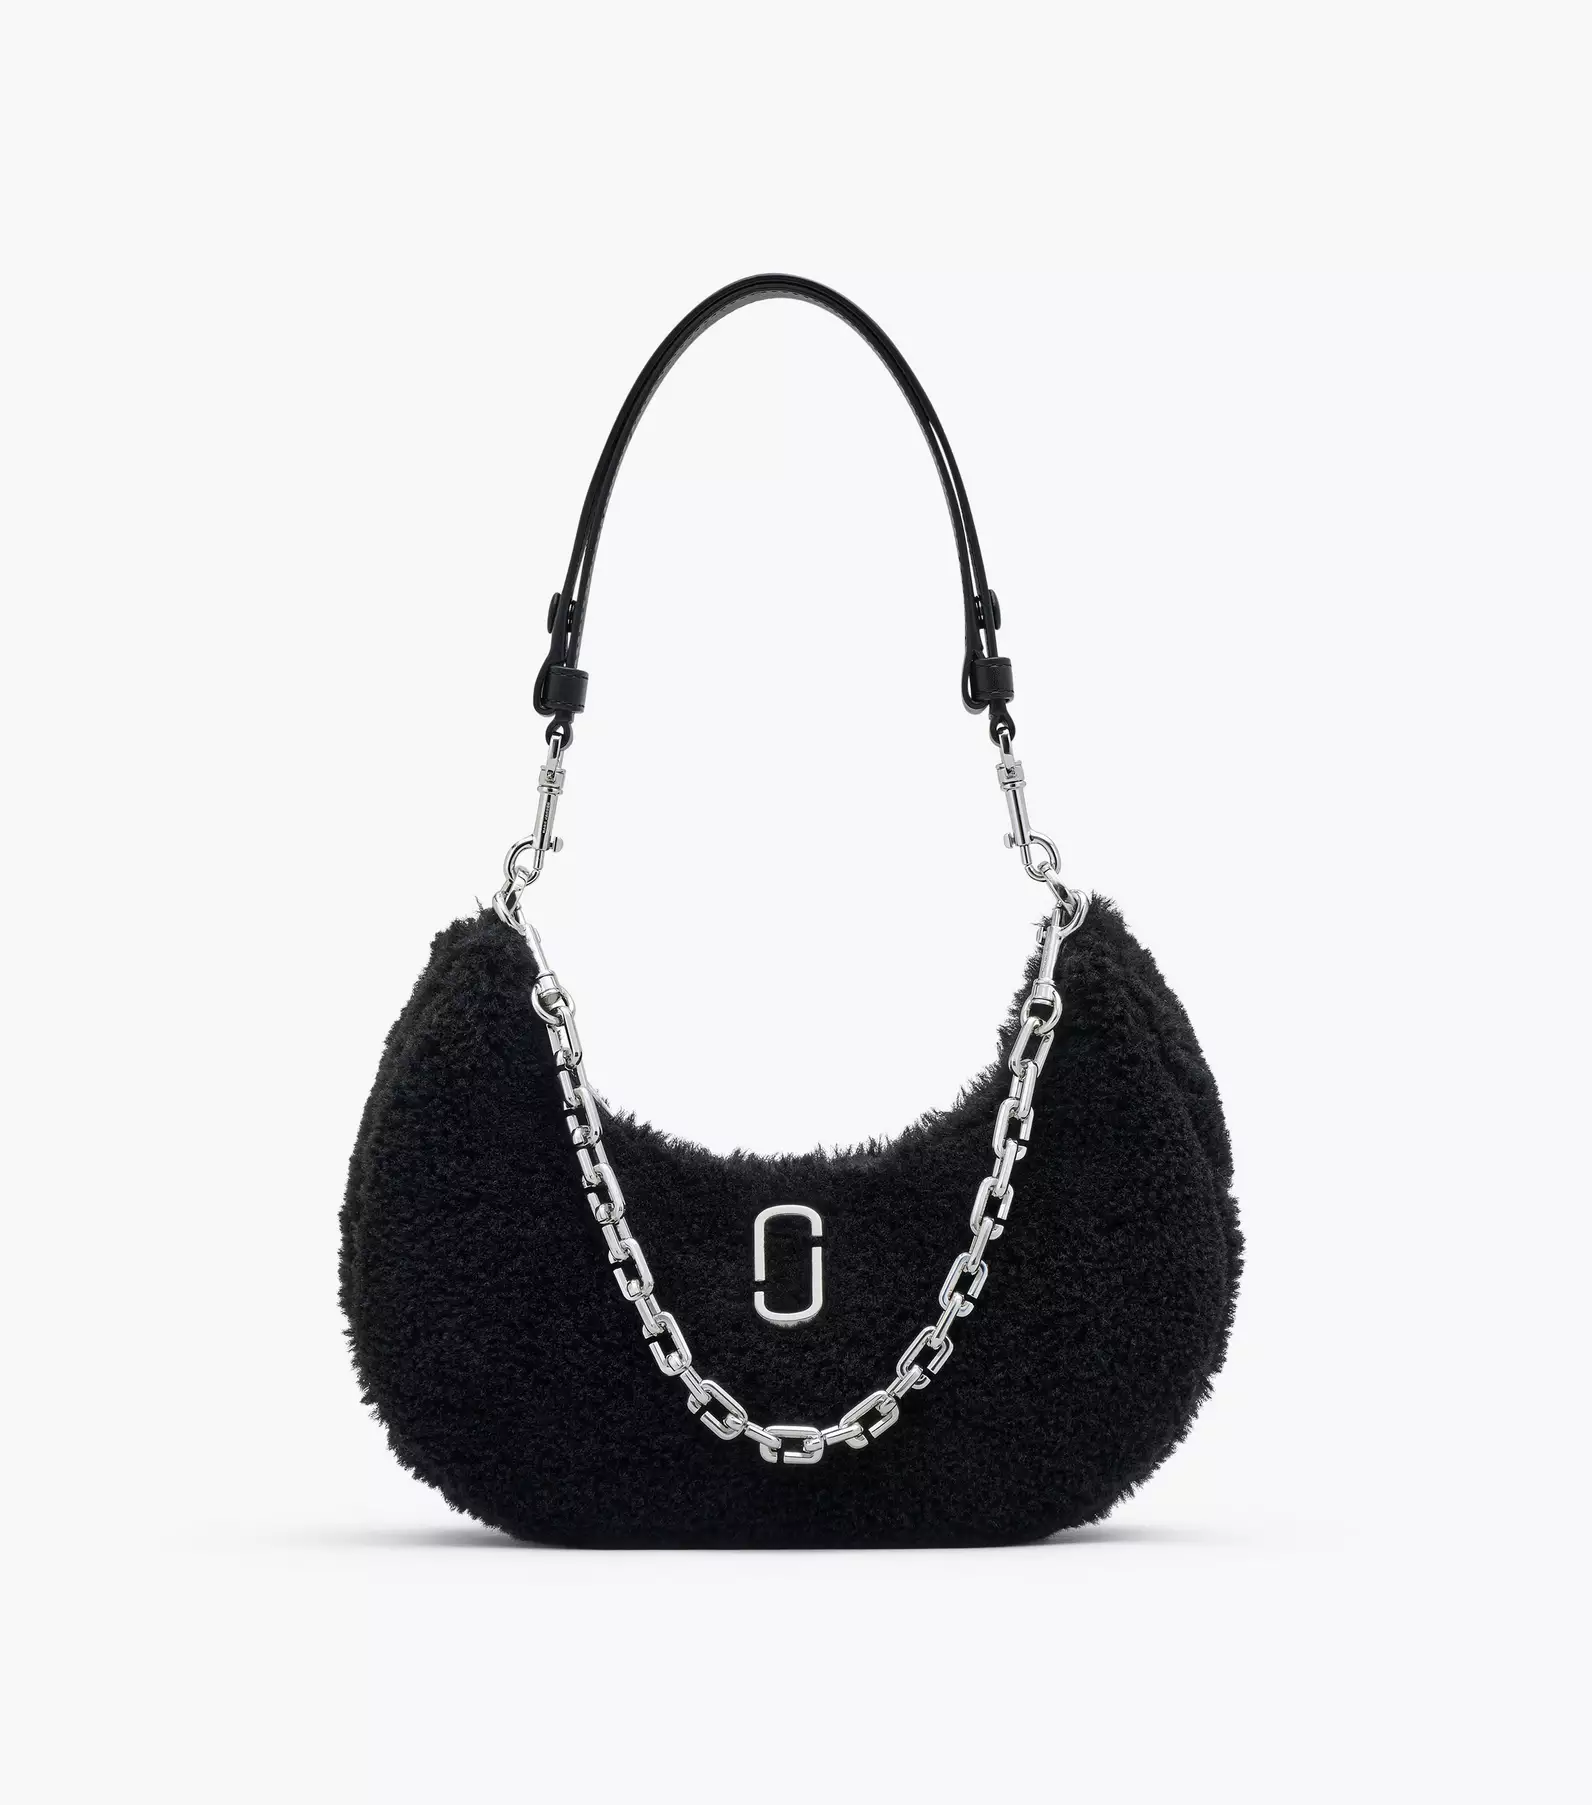 The Curve Small Leather Shoulder Bag in Black - Marc Jacobs